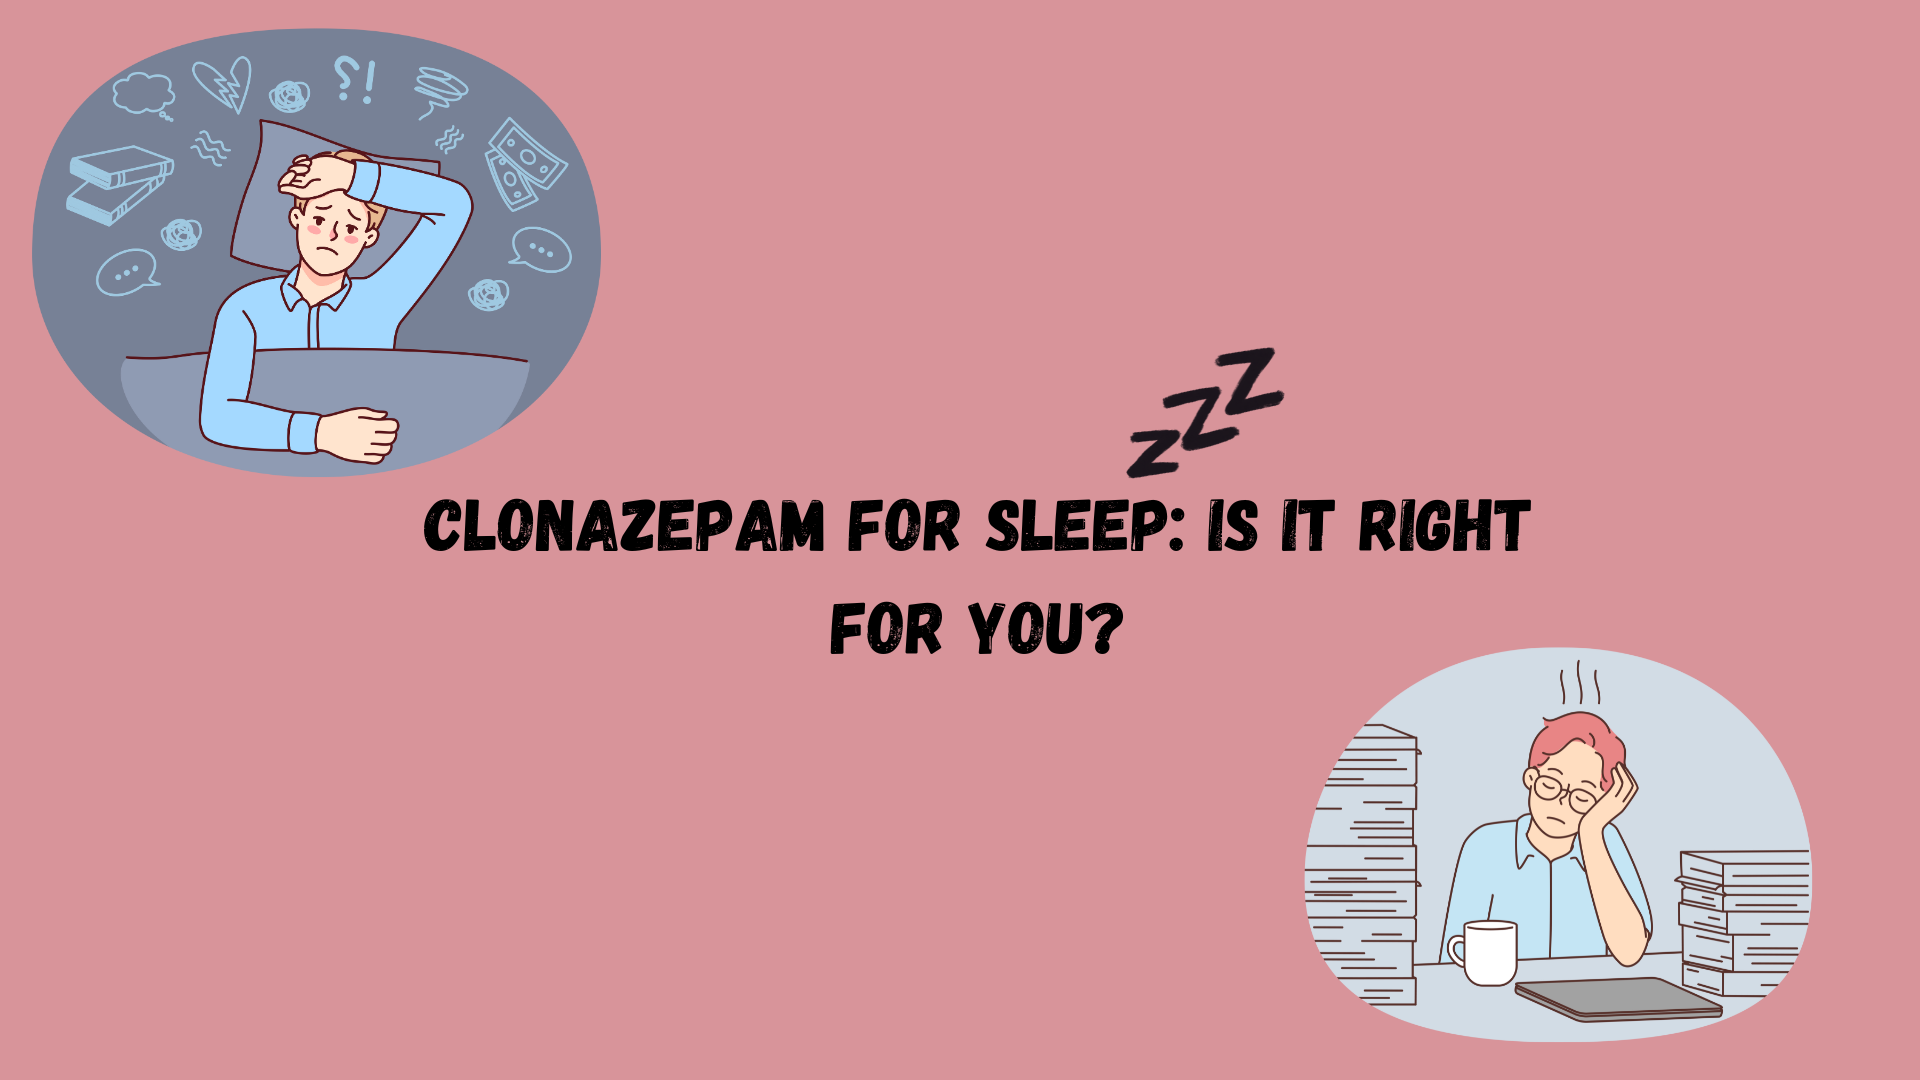 Clonazepam for Sleep: Is It Right for You? 1